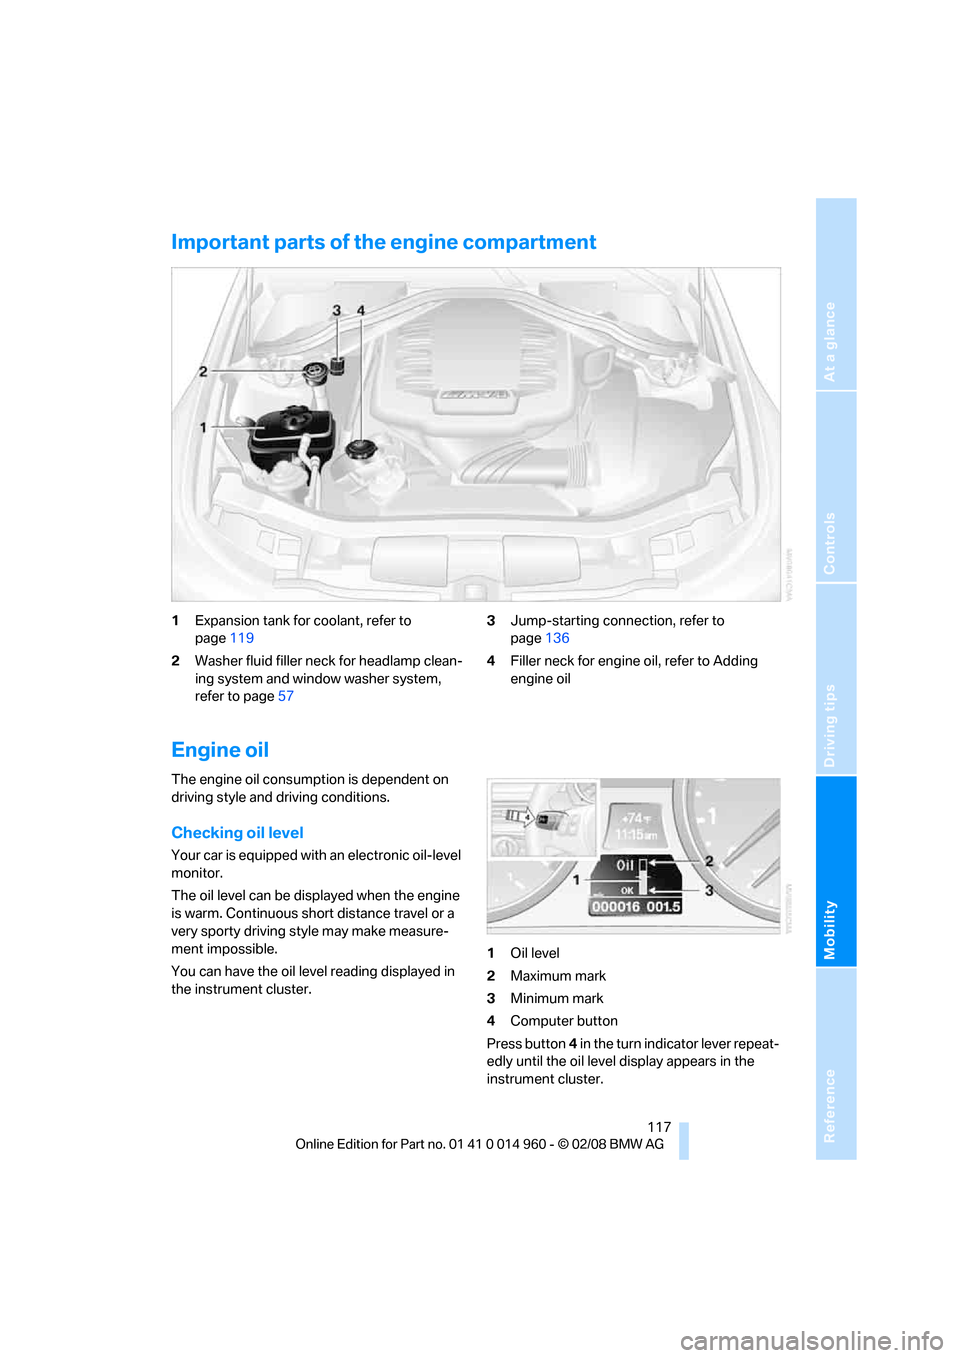 BMW M3 COUPE 2008 E92 Owners Manual Reference
At a glance
Controls
Driving tips
Mobility
 117
Important parts of the engine compartment
1Expansion tank for coolant, refer to 
page119
2Washer fluid filler neck for headlamp clean-
ing sys